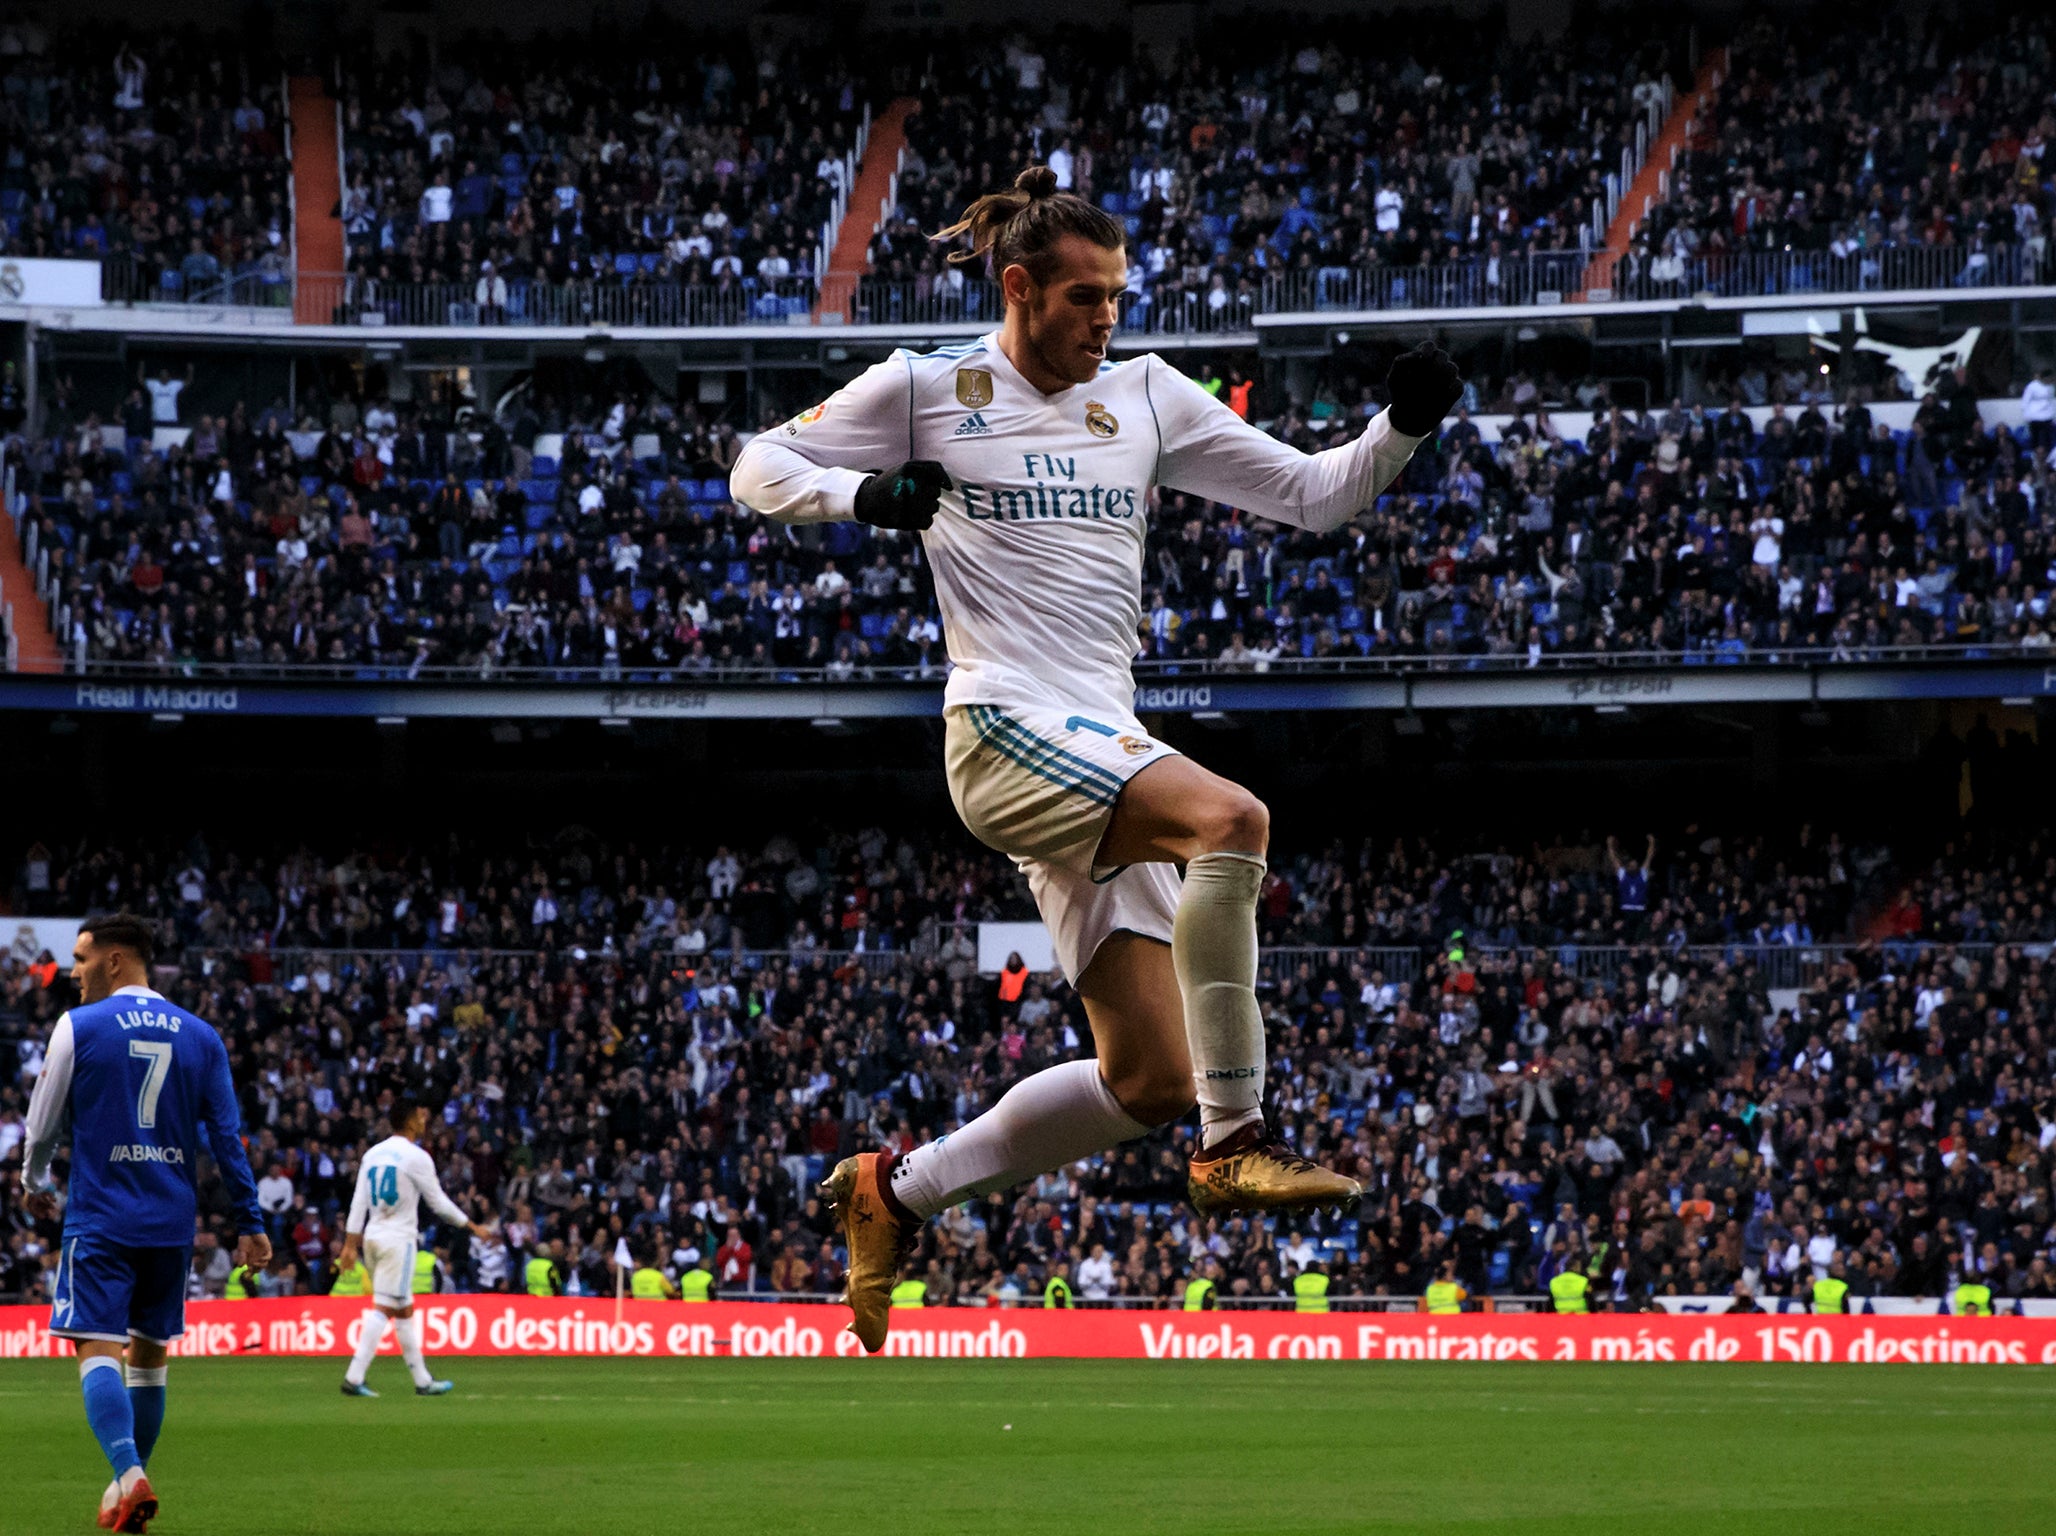 Bale departed to a standing ovation